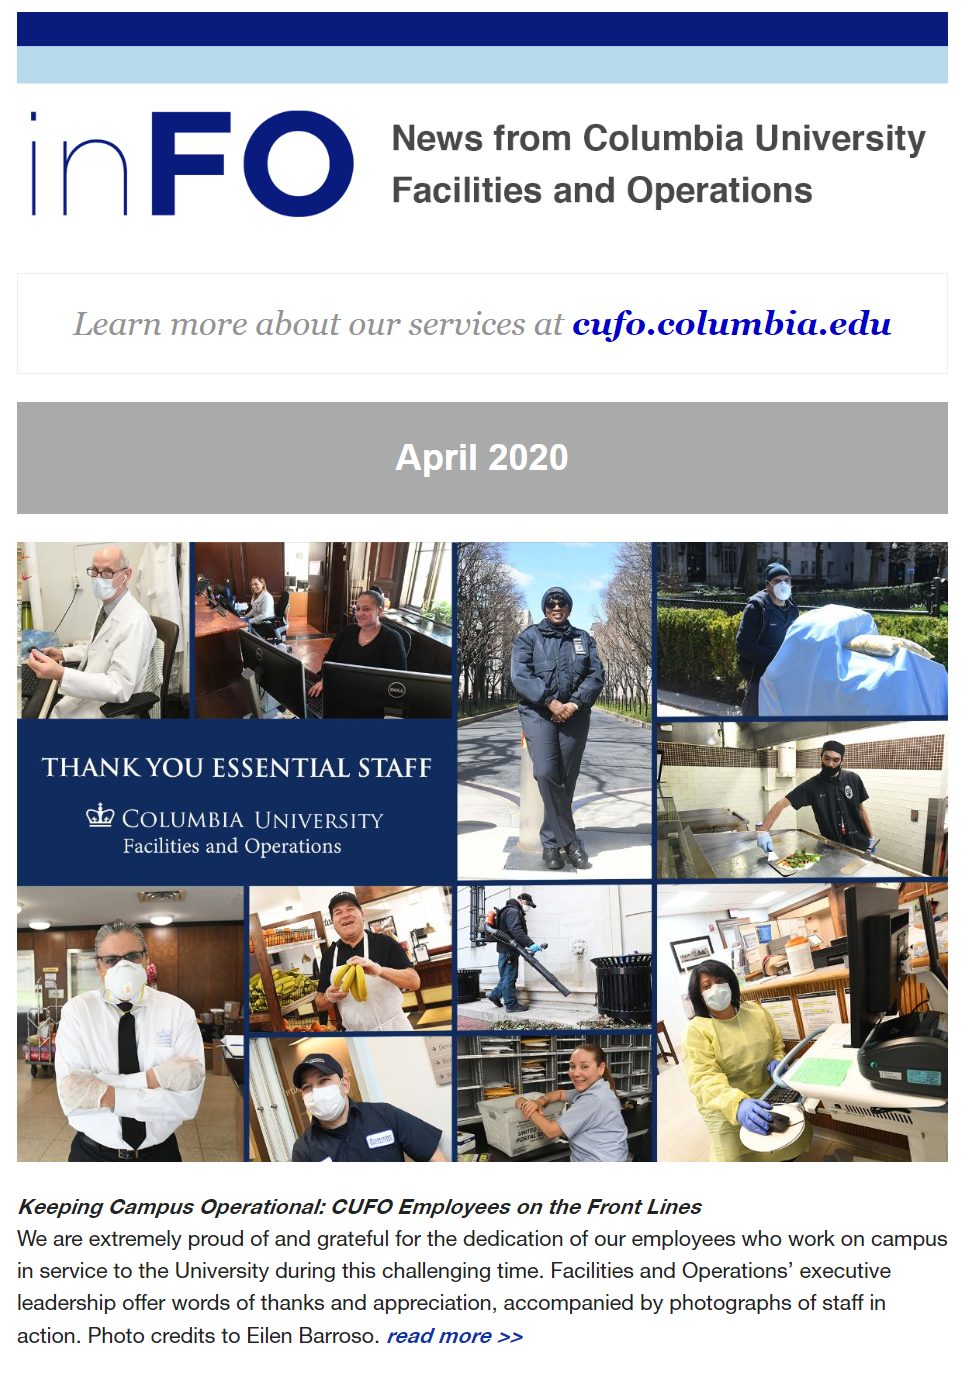 Screenshot of the April 2020 e-newsletter, showing a collage of photos of essential workers